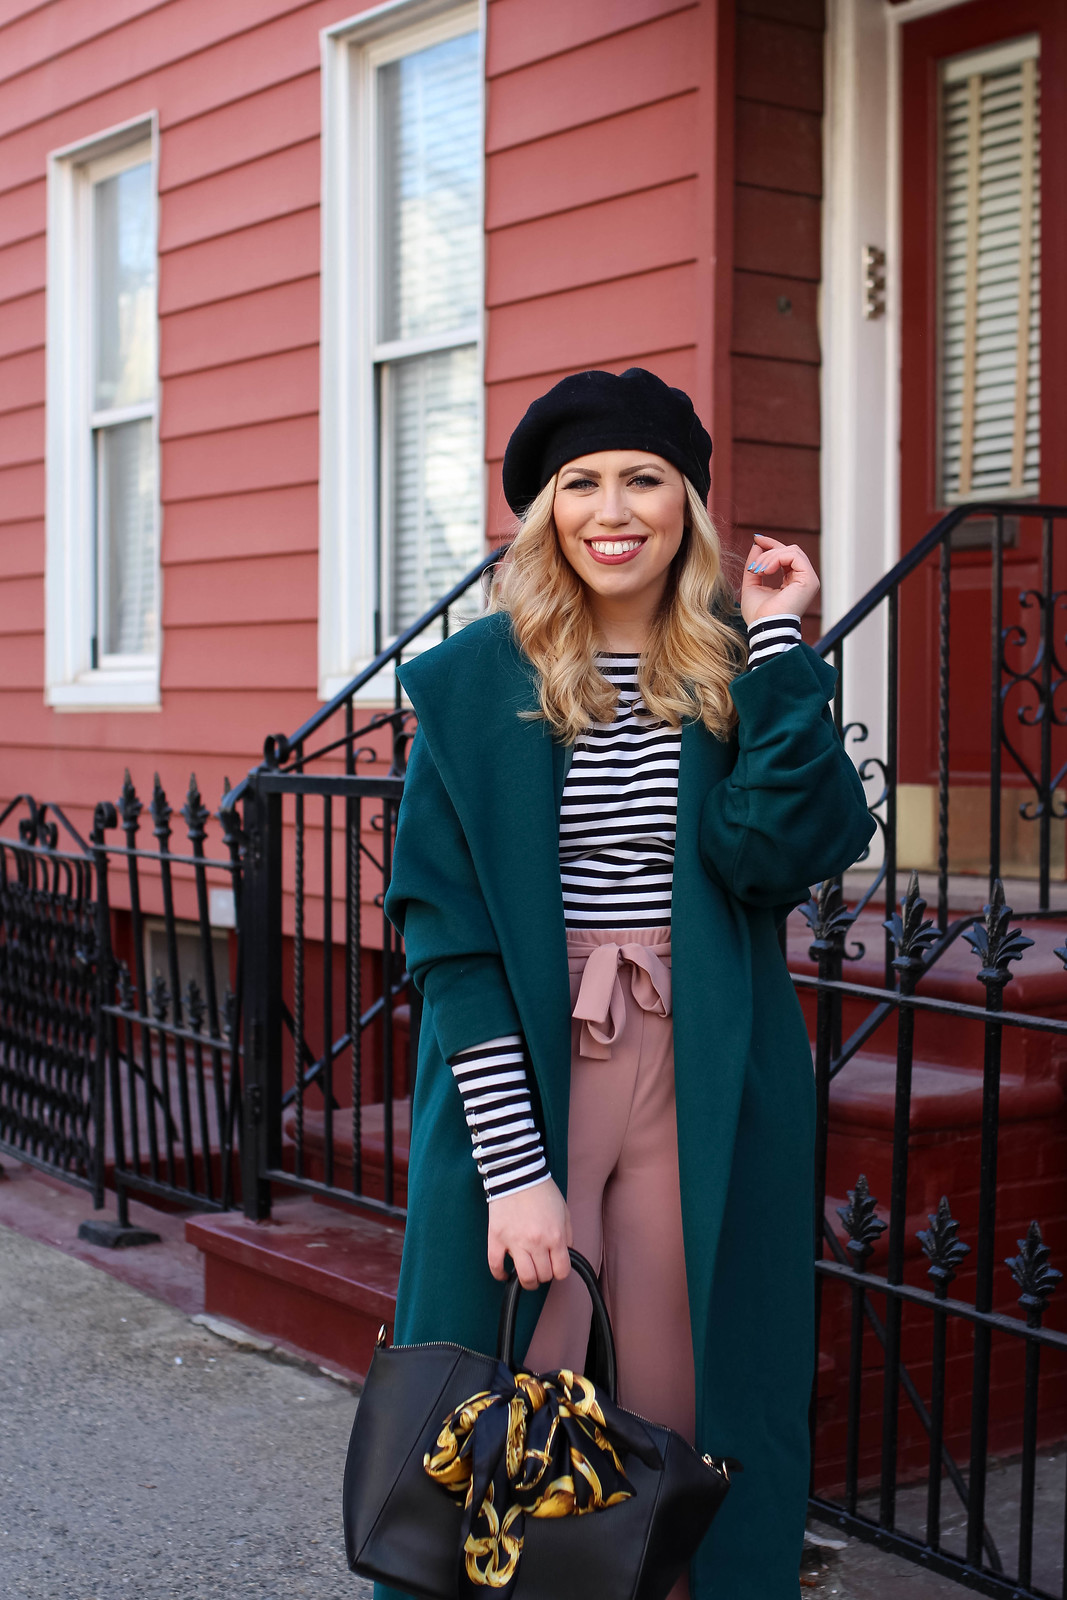 Winter 2018 Fashion Trends Black Beret Vintage Emerald Coat Striped Shirt Pink Culottes Outfit Inspiration